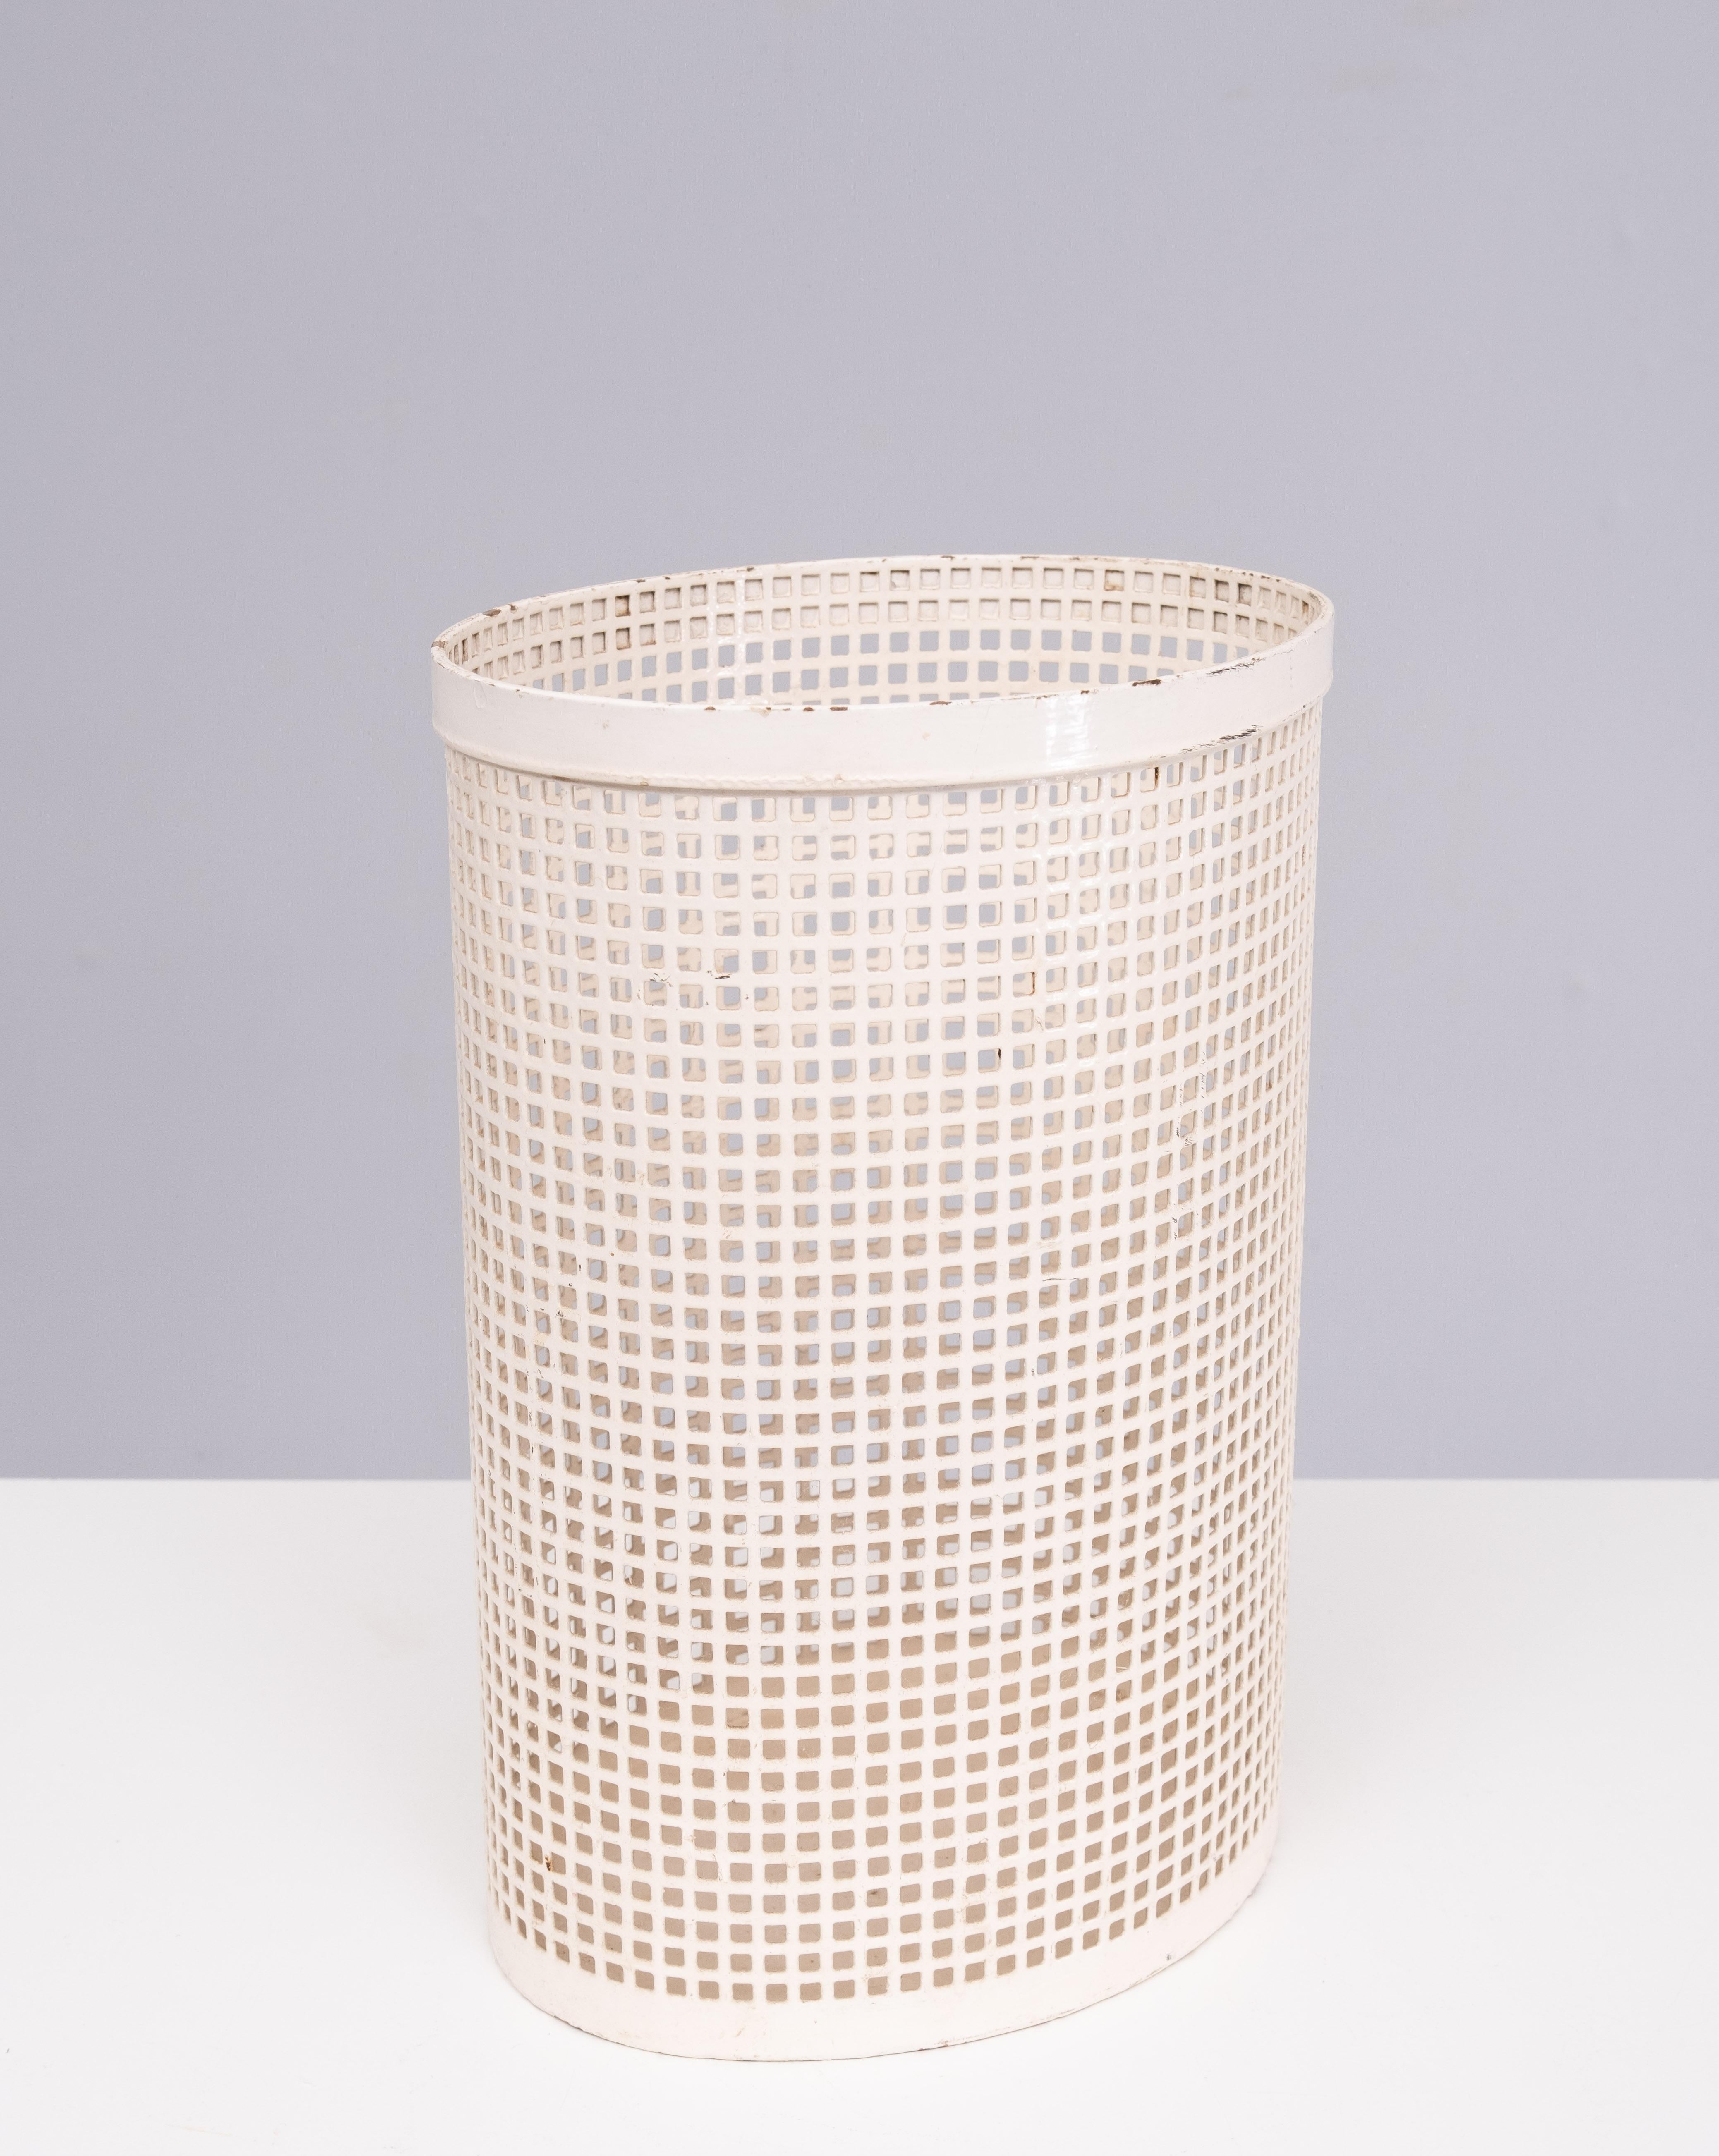 Mid-20th Century Perforated Metal Waste Basket 1950s France  For Sale